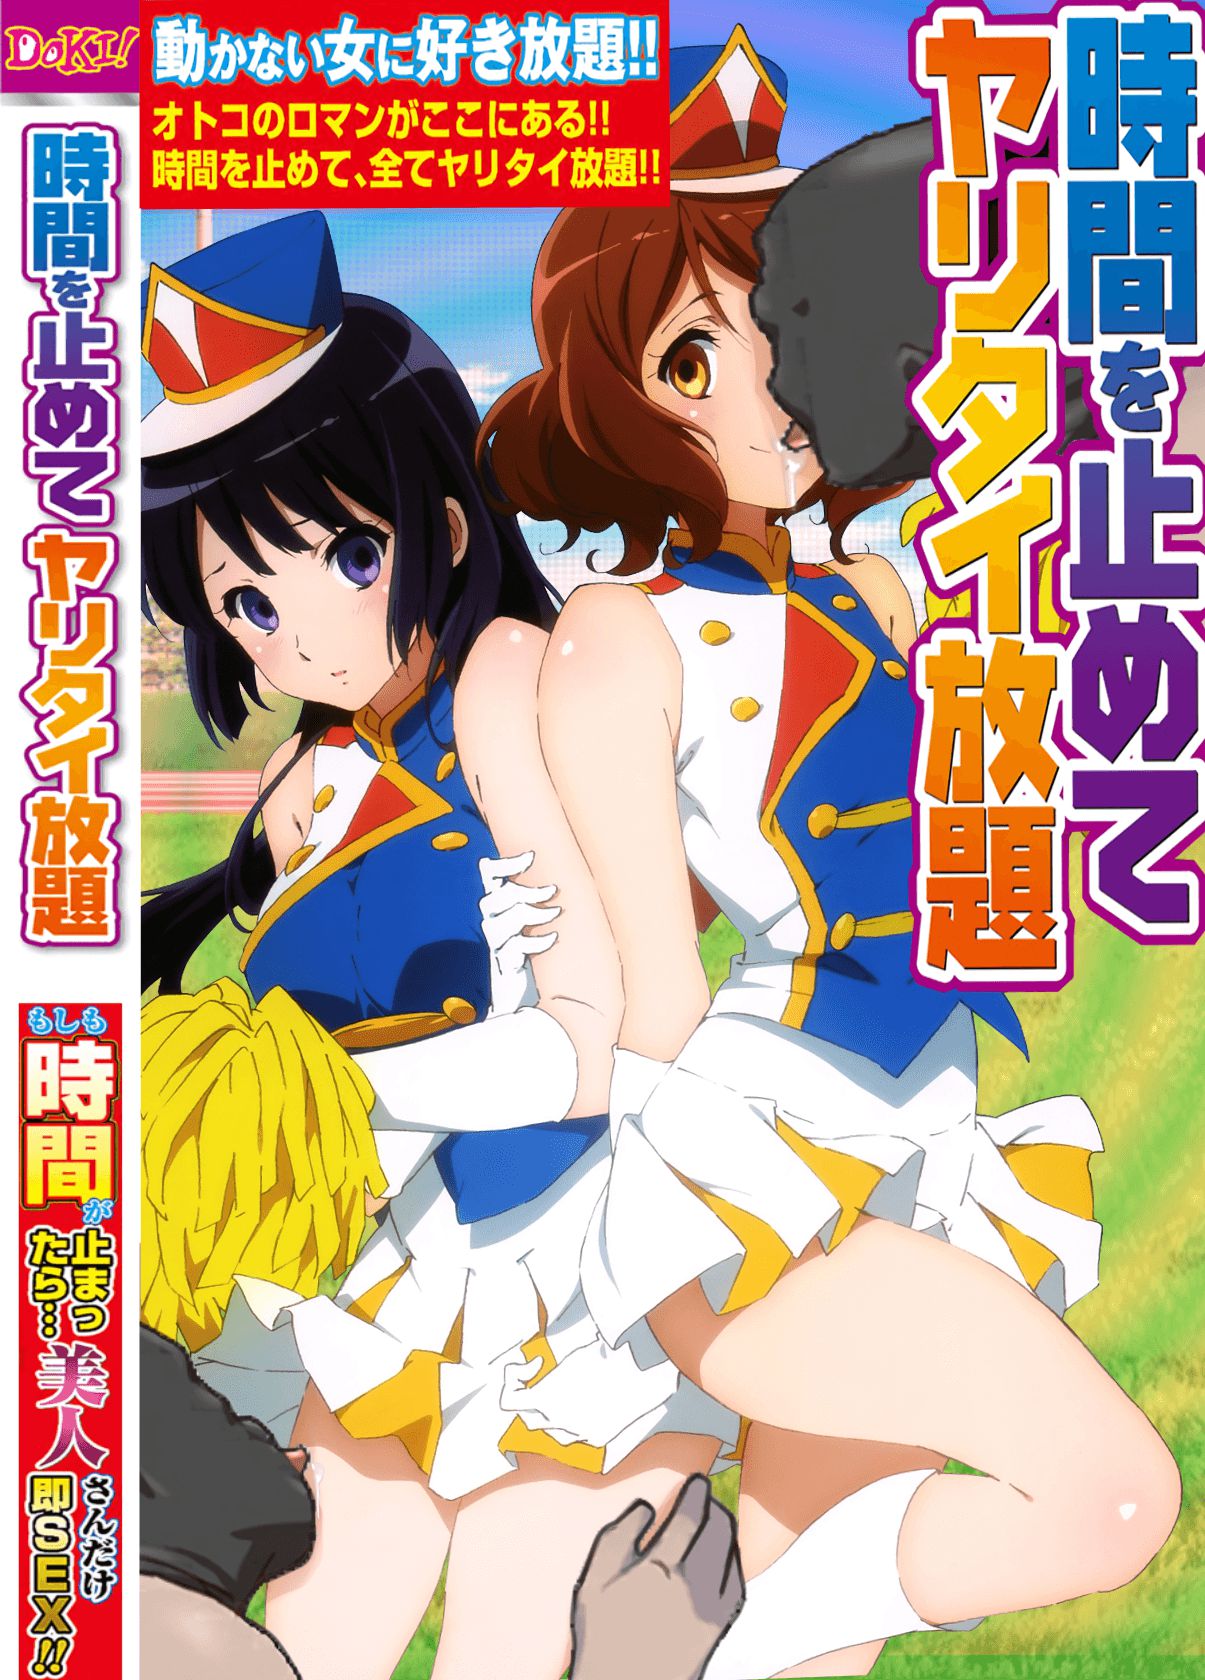 【AV Pakekora】 Anime characters that have been made into AV packages and magazine covers Part 86 with Pakekora Material Part 32 10